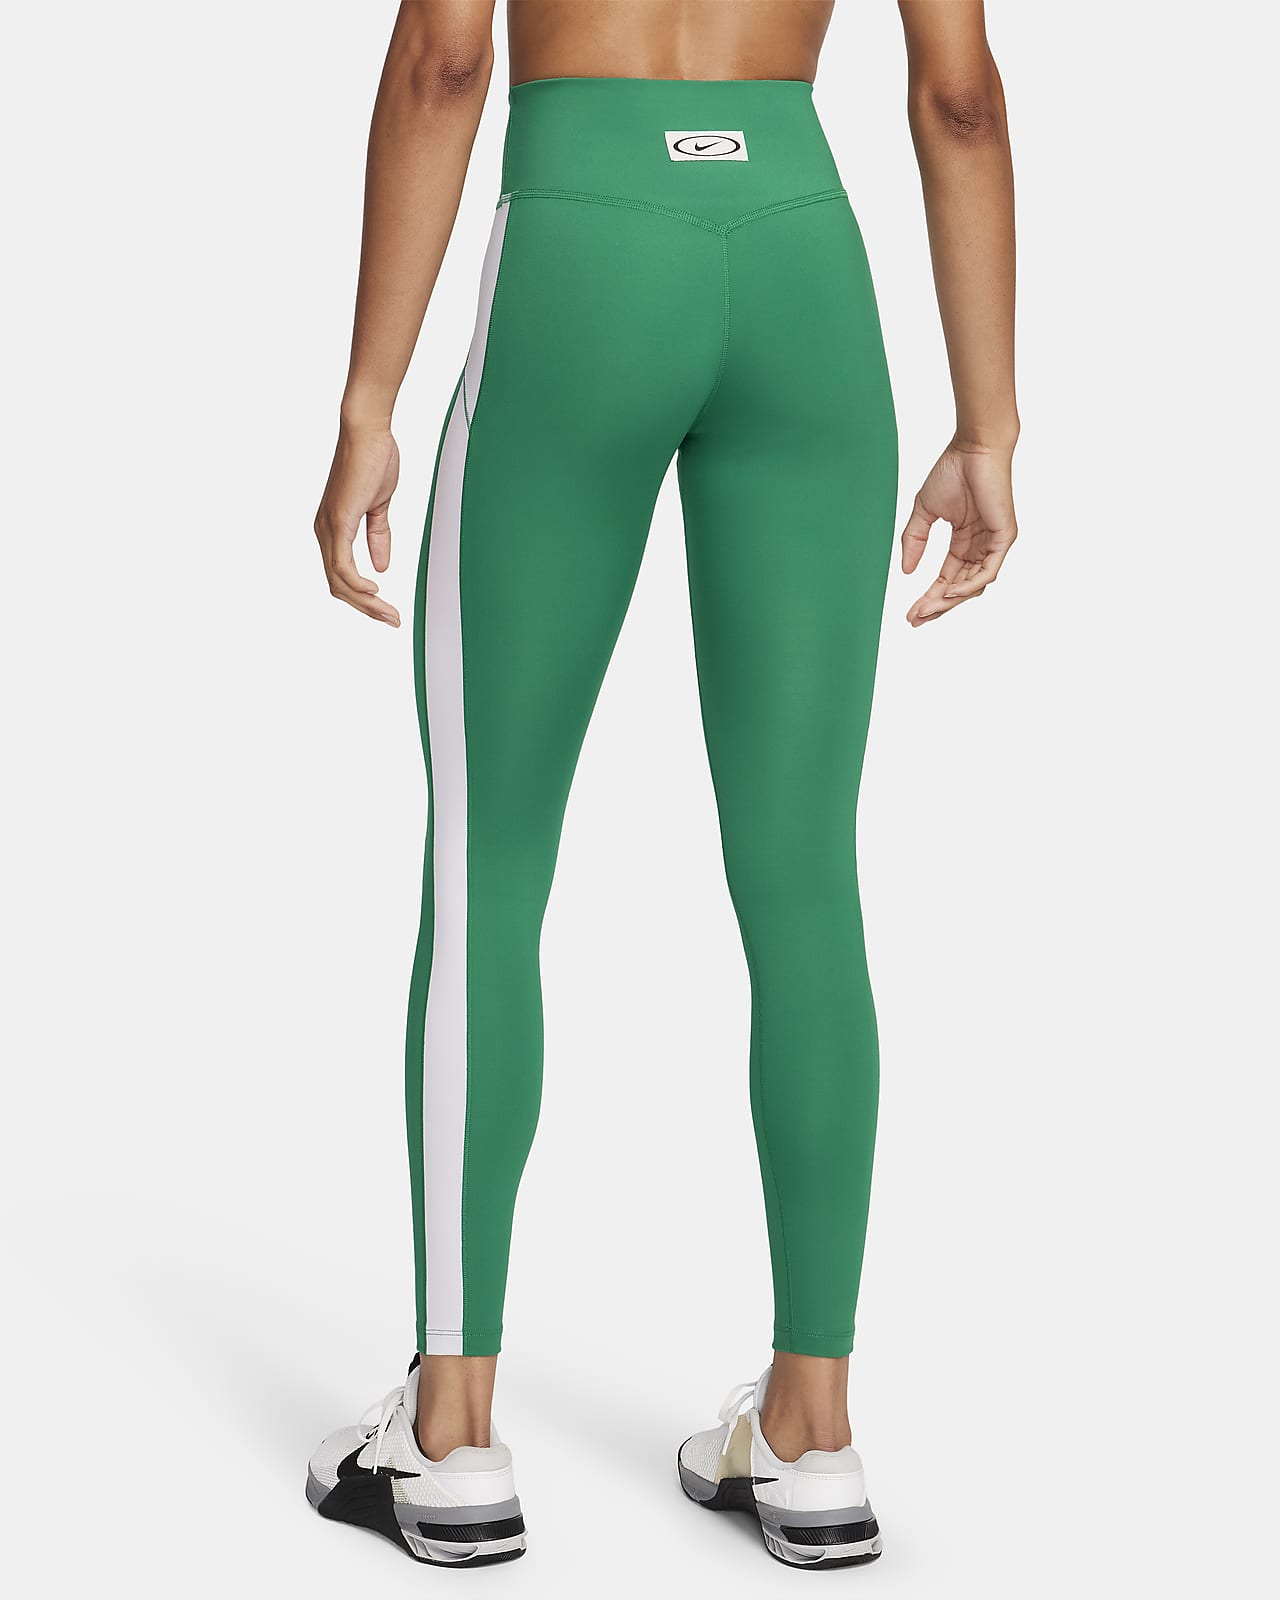 Nike One Mid-Rise Leggings Black / White Ready for a workout or down to  chill—the Nike One Leggings are super versatile. The comfortable design  wicks sweat to help keep you dry. Plus